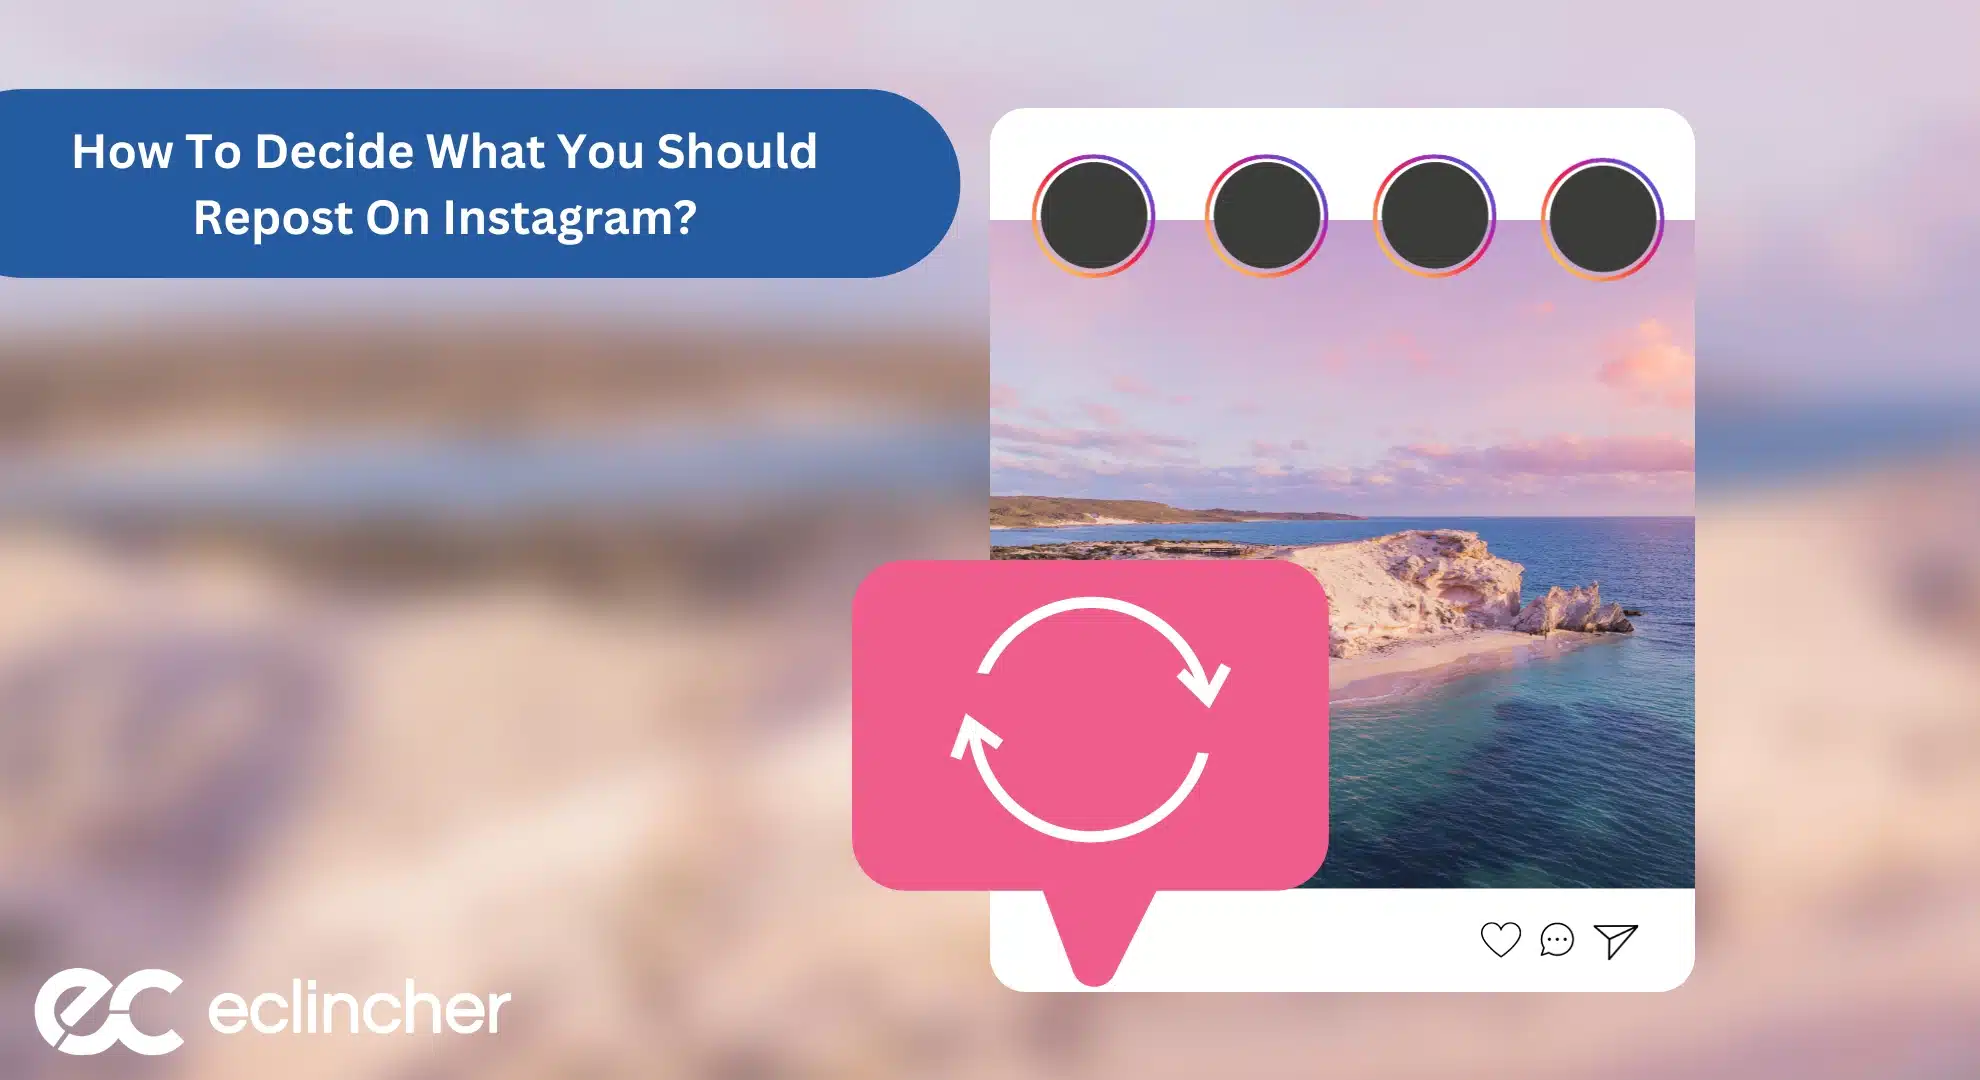 How To Decide What You Should Repost On Instagram